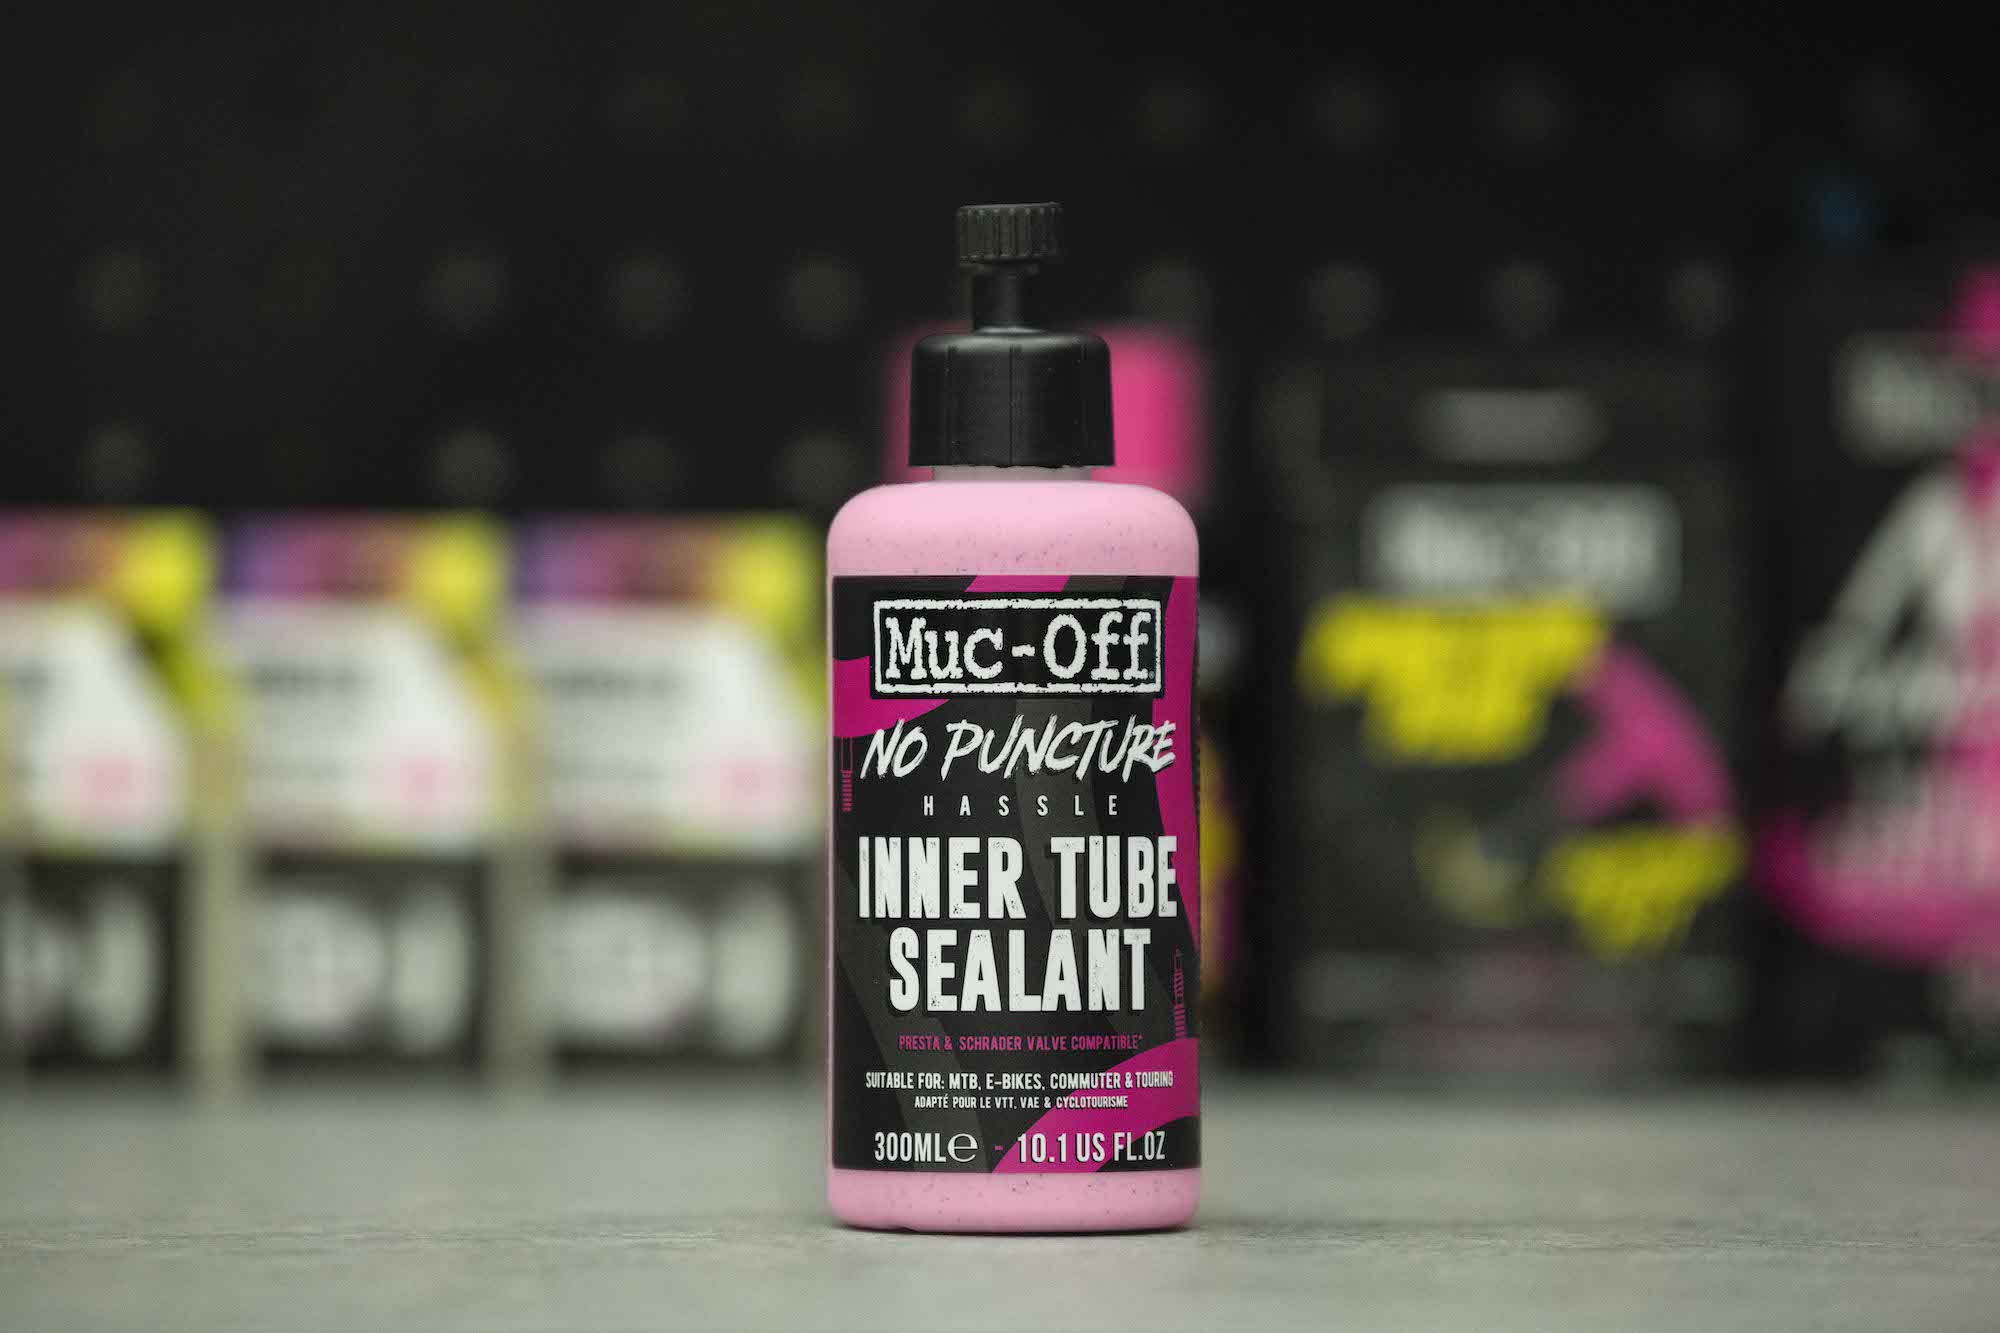 Muc-Off Inner Tube Sealant for No Puncture Hassle bottle